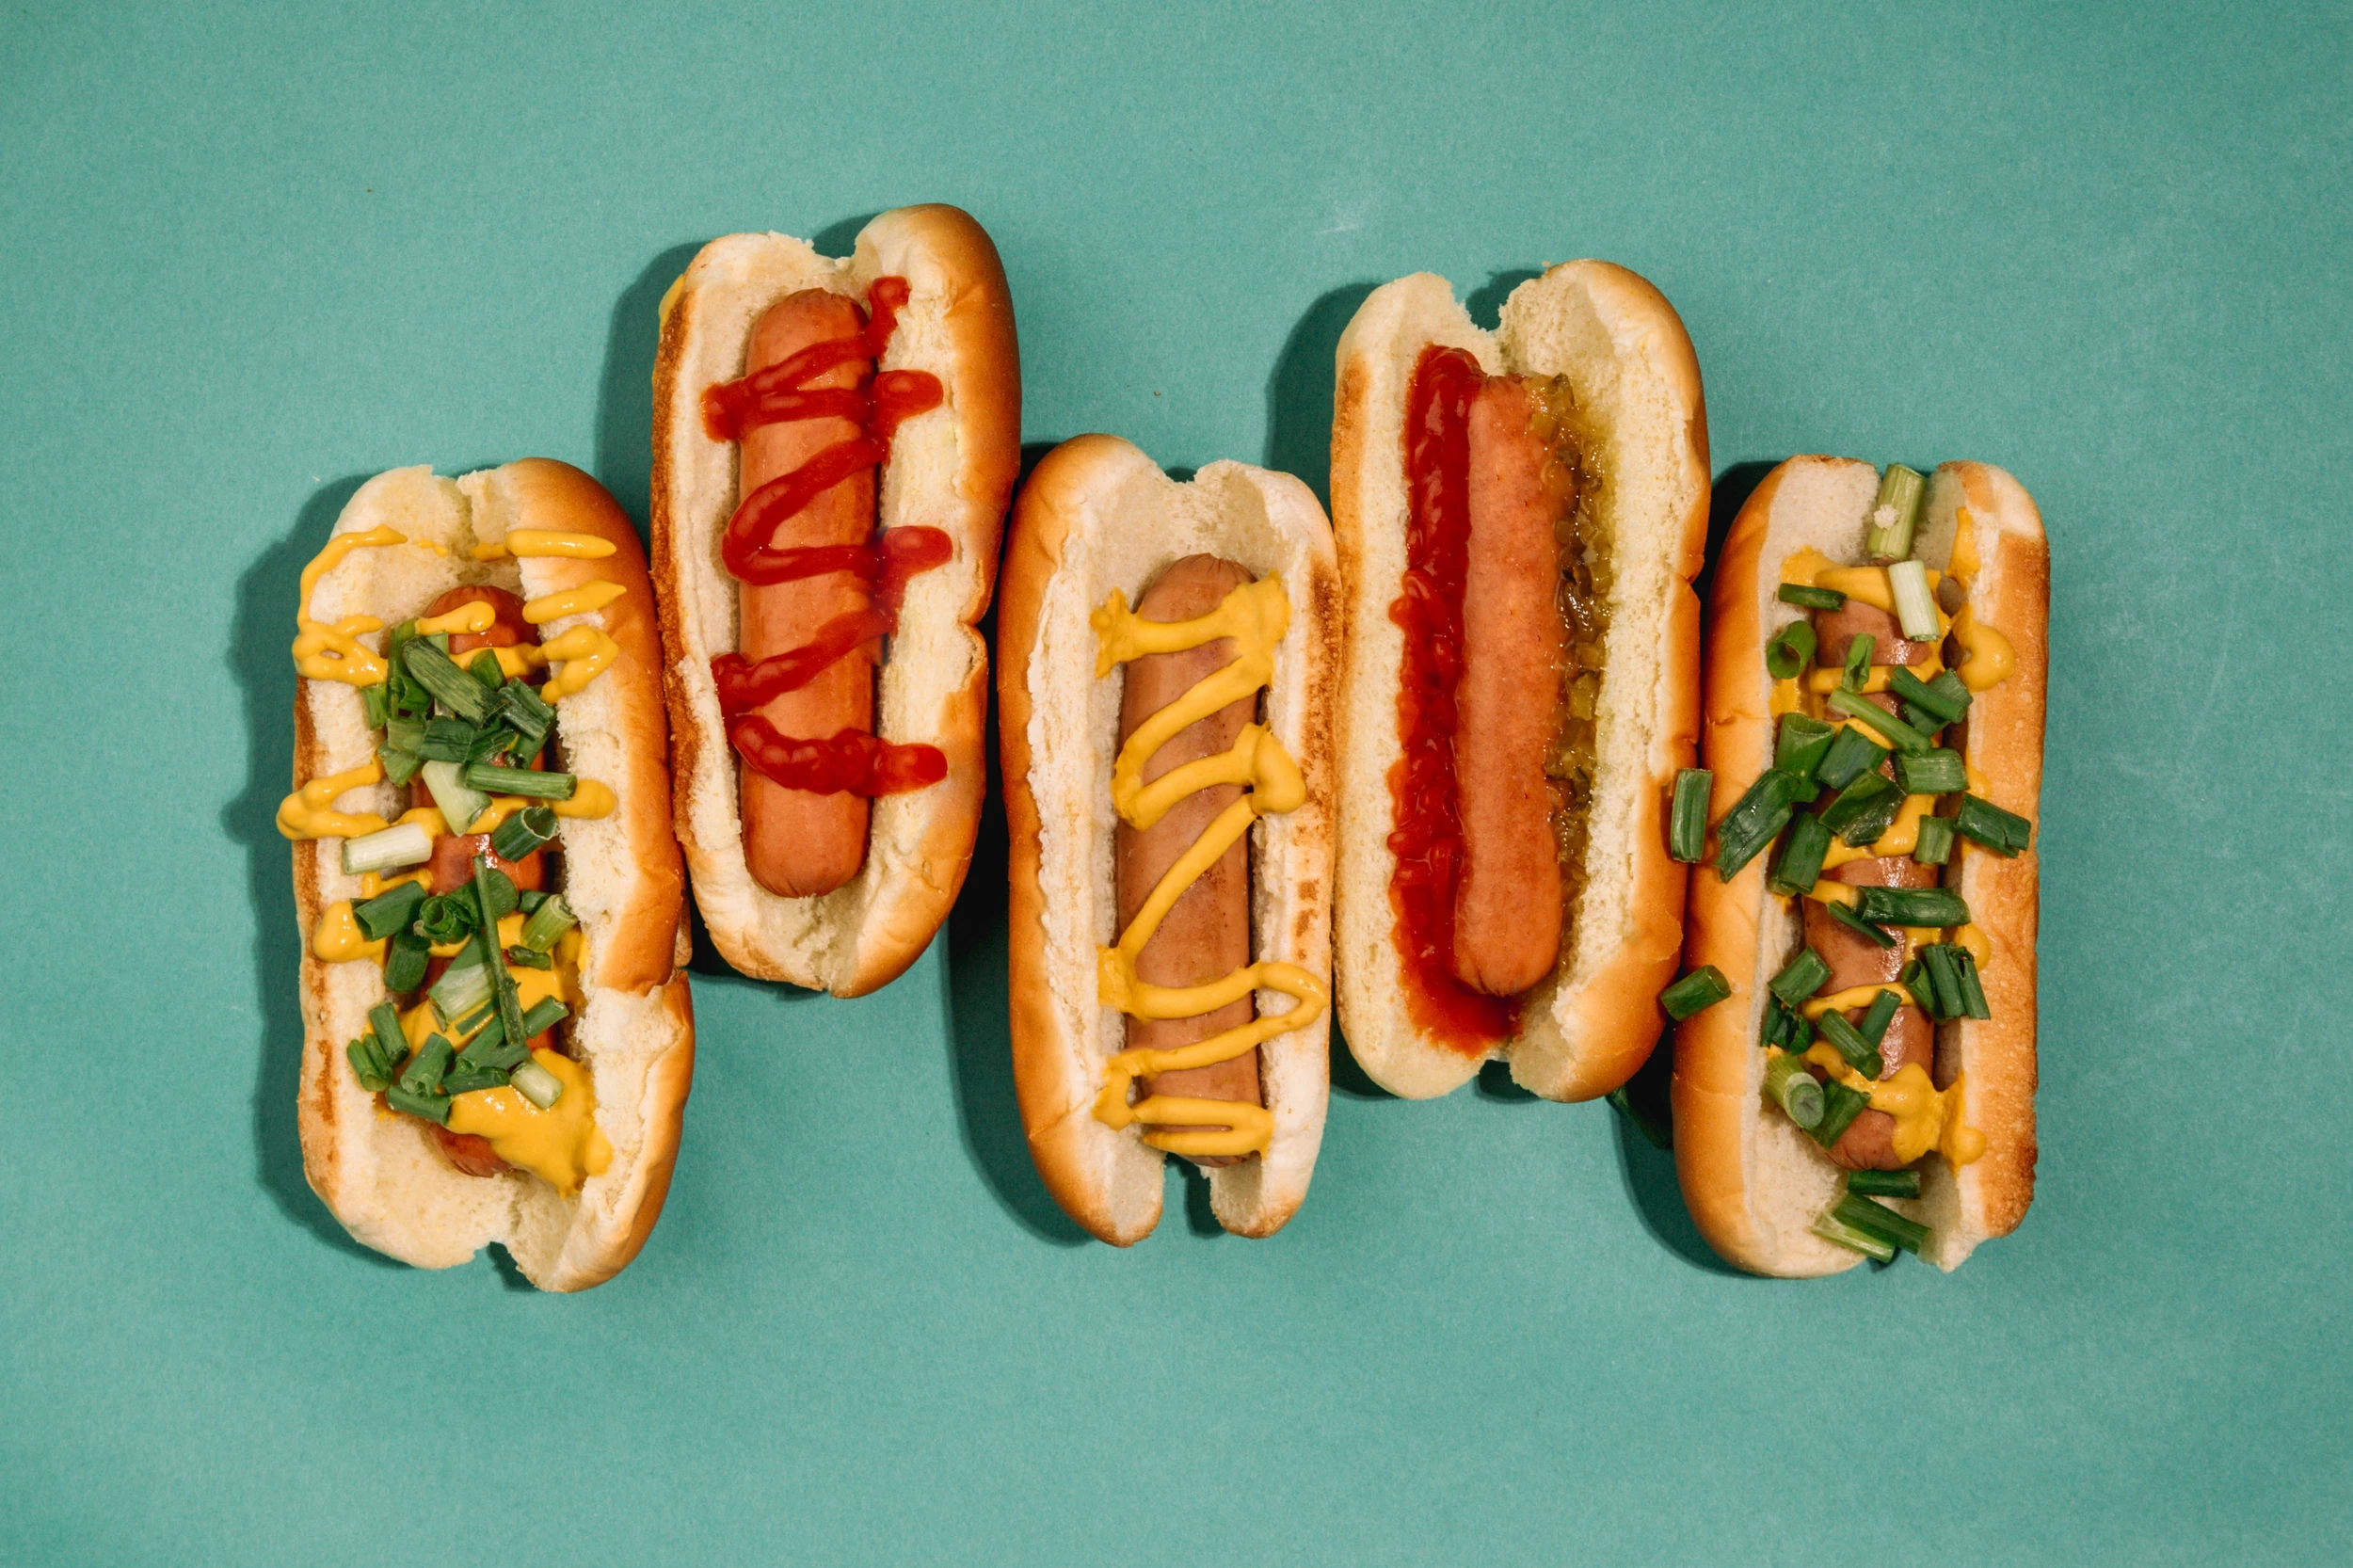 NYC Publication Names North Jersey Hot Dog a Standout